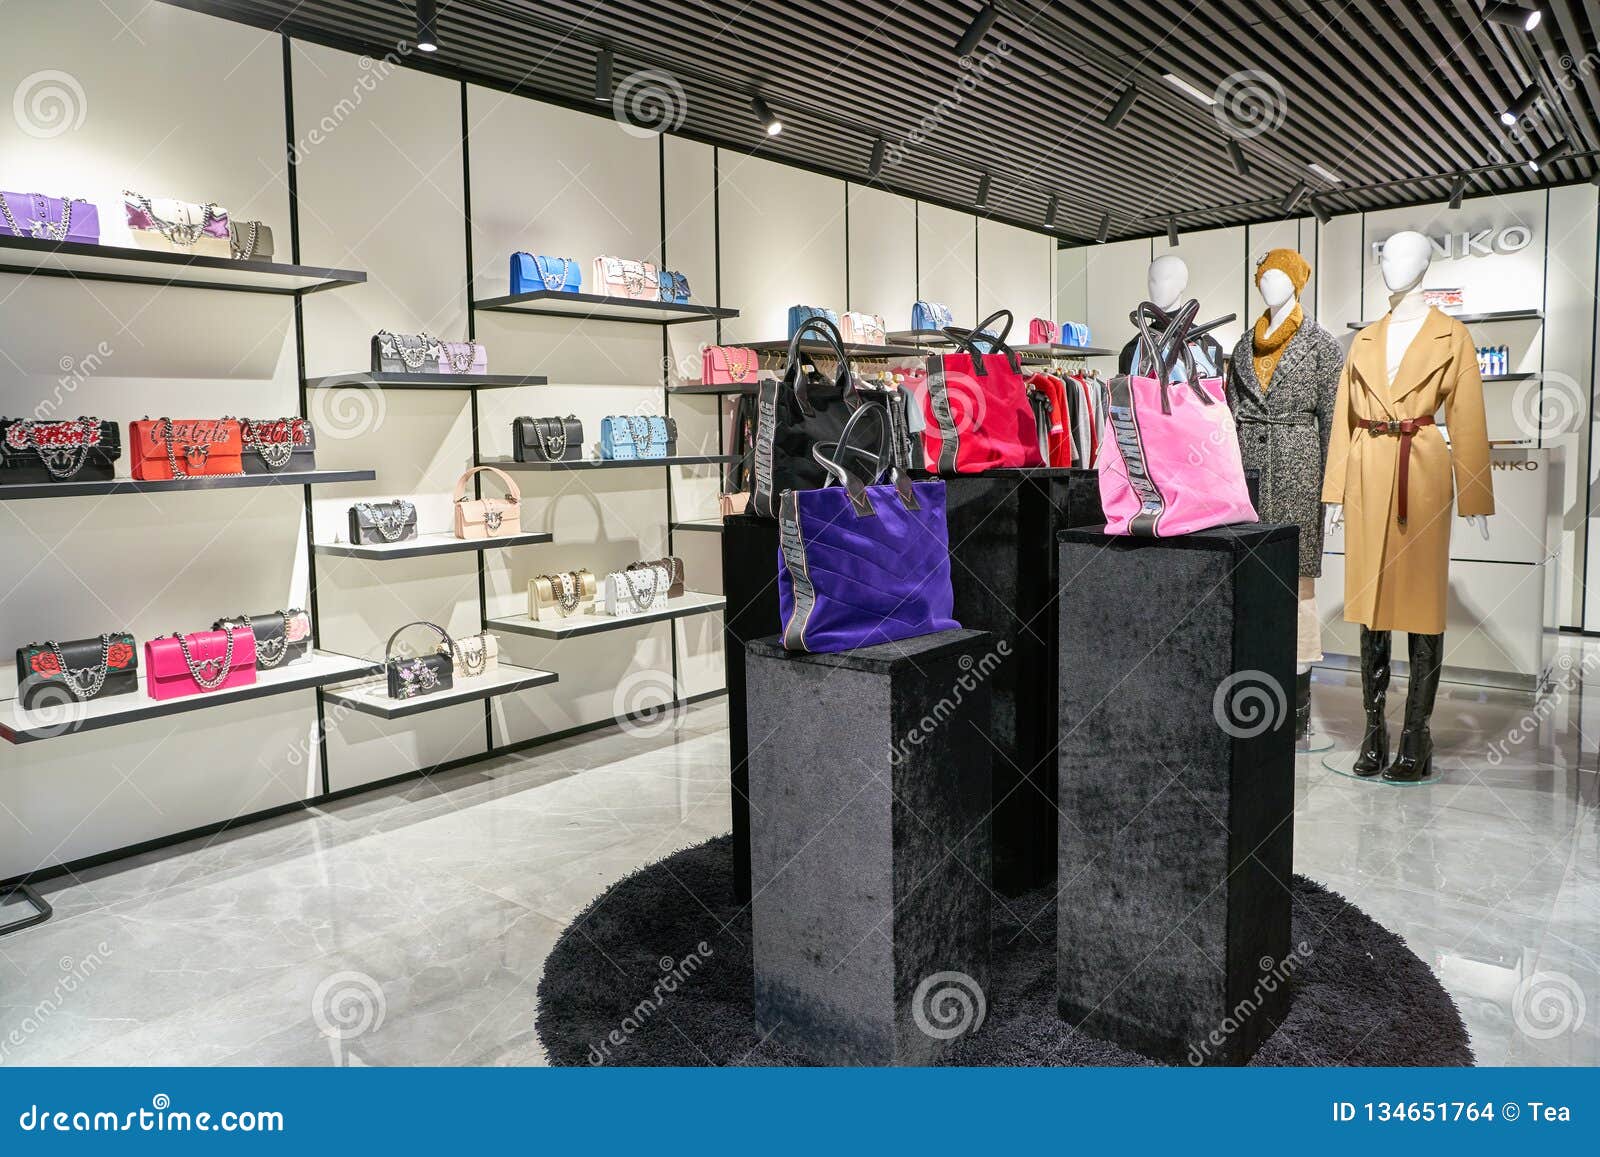 Pinko editorial stock image. Image of sale, retail, outlet - 134651764